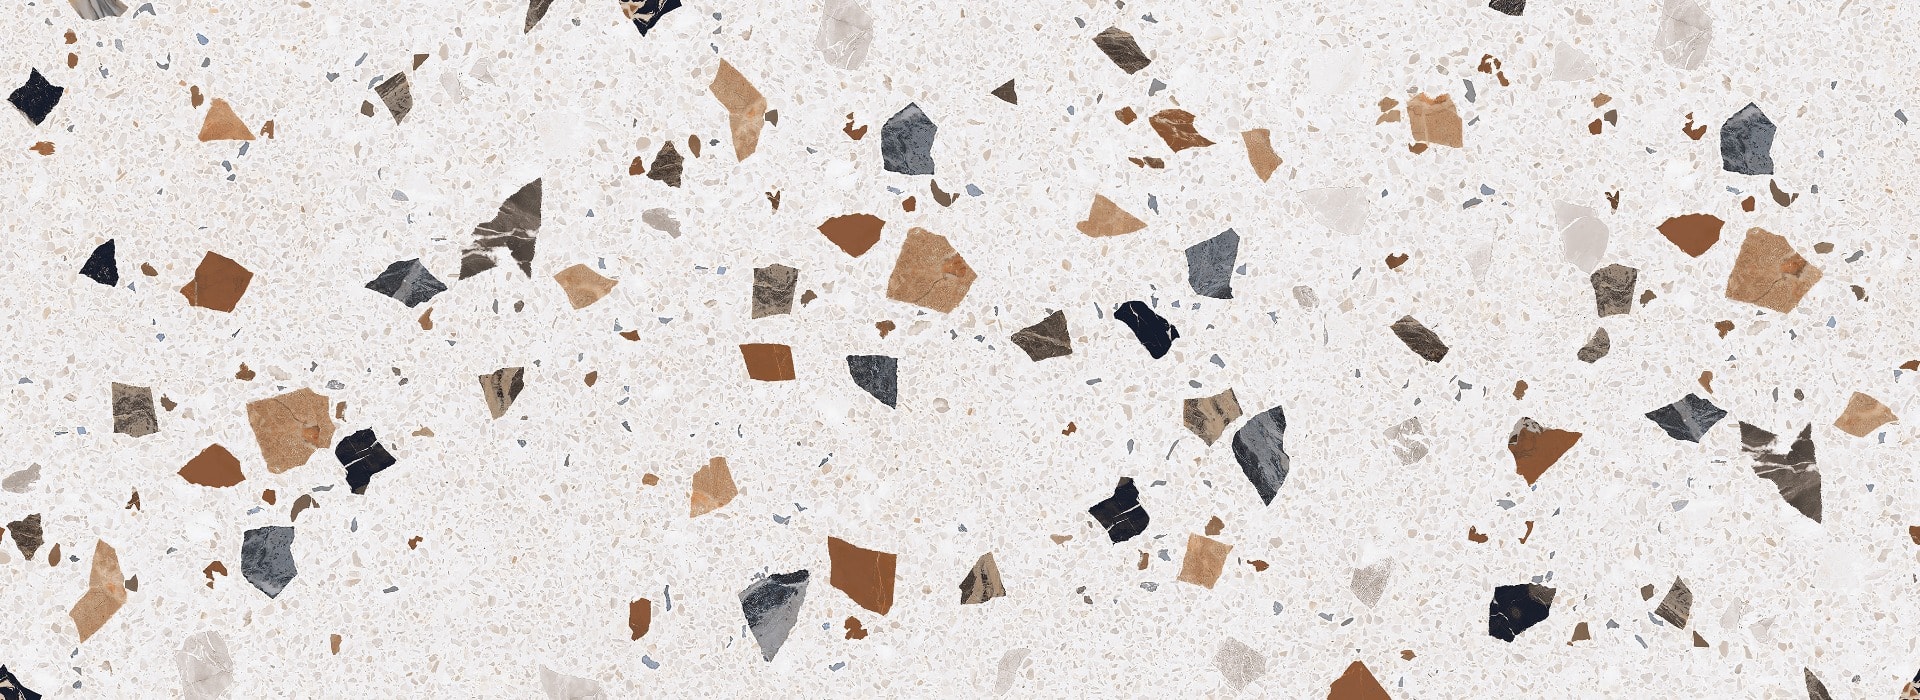 Terrazzo marble flooring seamless texture. Natural stones, granite, marble, quartz, limestone, concrete. Beige background with colored chips.